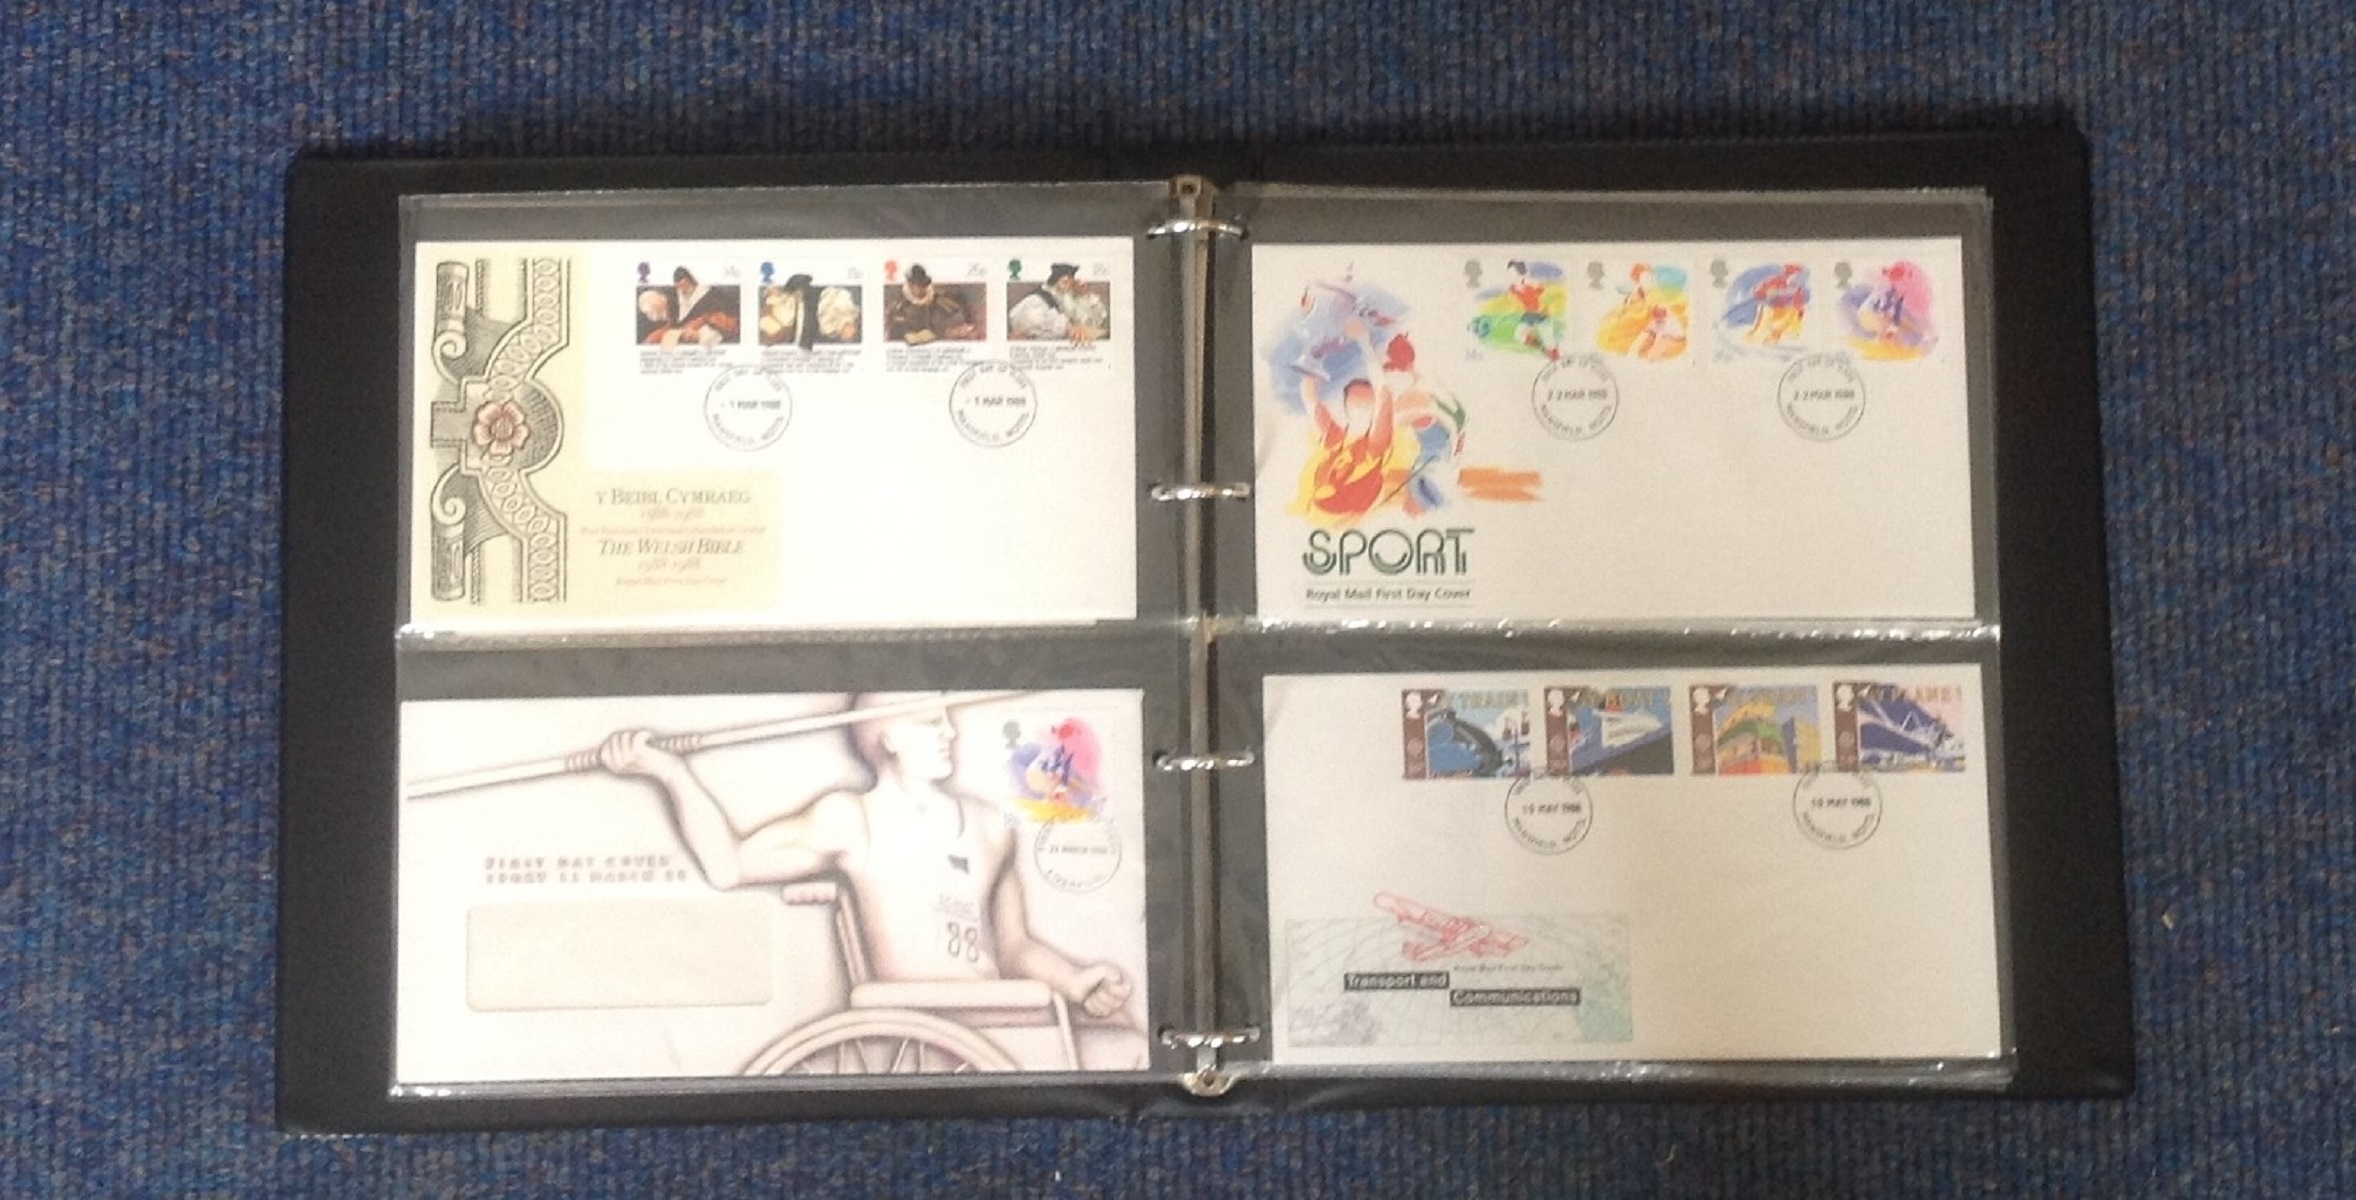 GB Clean FDC collection, 46 covers from 1985, 1989 including many nice Stuart covers in Black 4 ring - Image 5 of 6